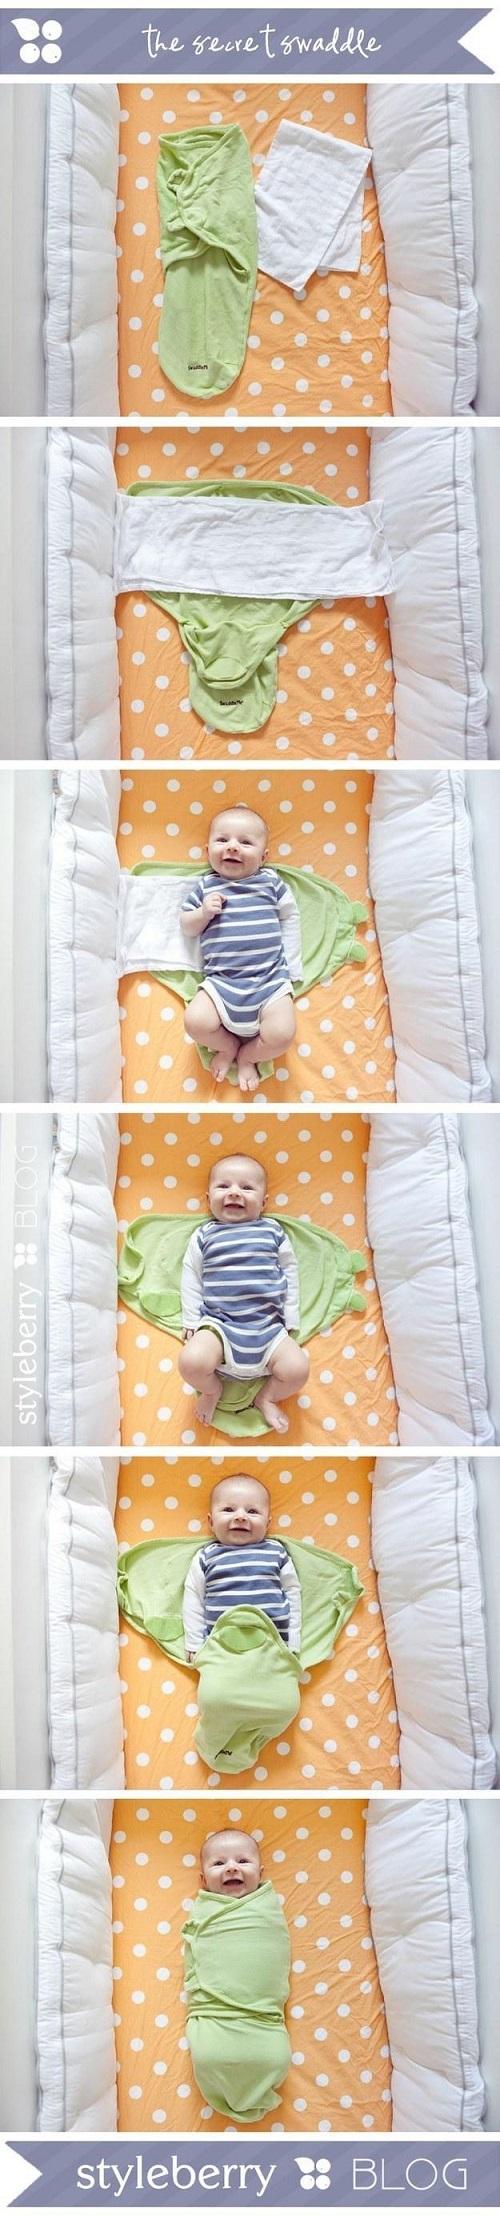 Use the secret swaddle to get even the most sleep-resistant baby to sleep